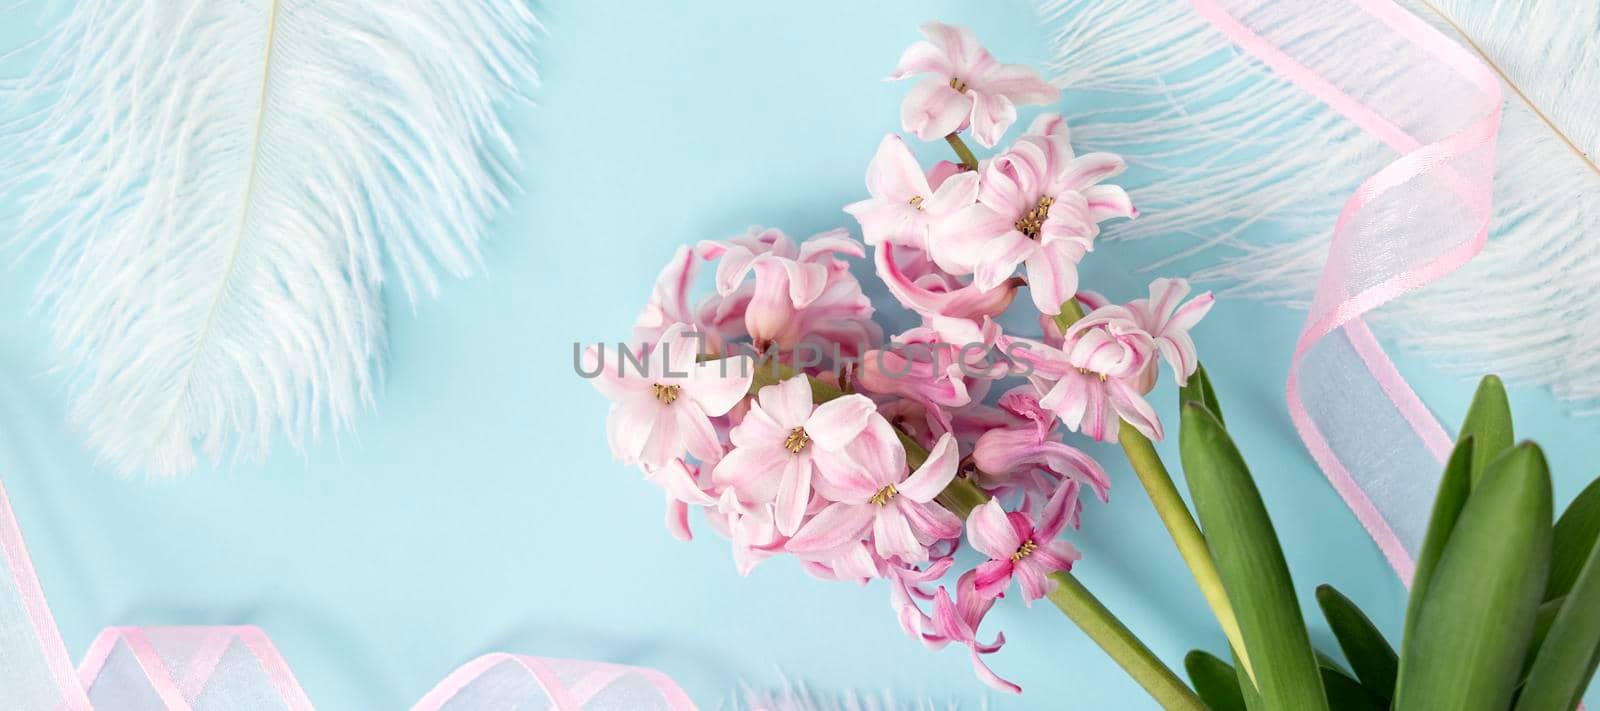 banner with pink hyacinth flowers with white feathers on pastel blue or cyan colors with pink ribbon. Spring coming concept. Spring or summer background. Top view